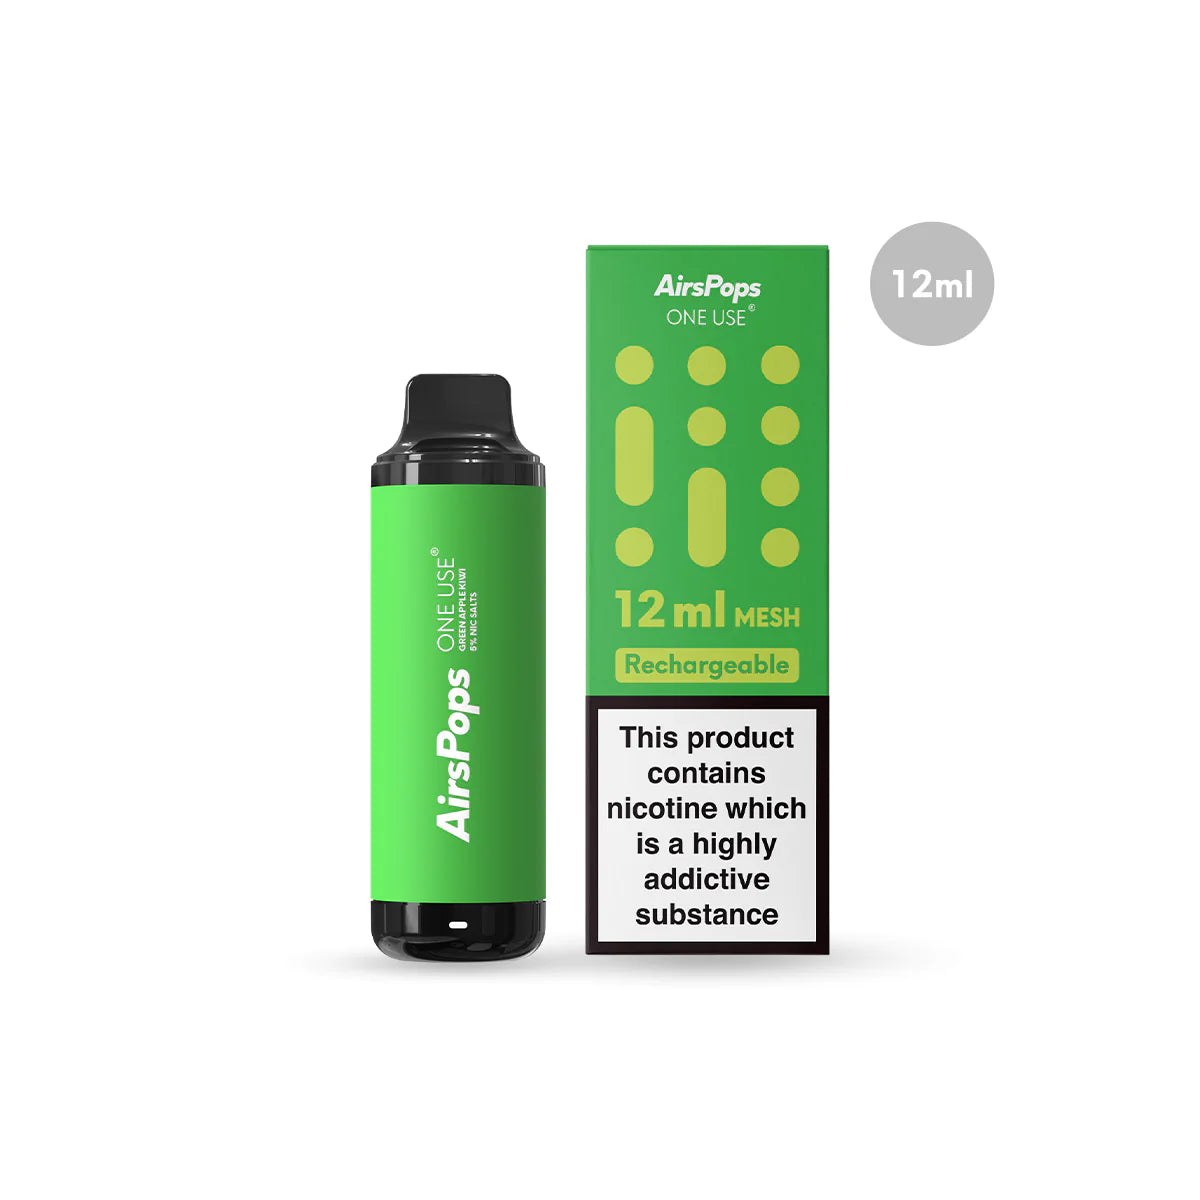 AirsPops ONE USE 12ml MESH Disposable